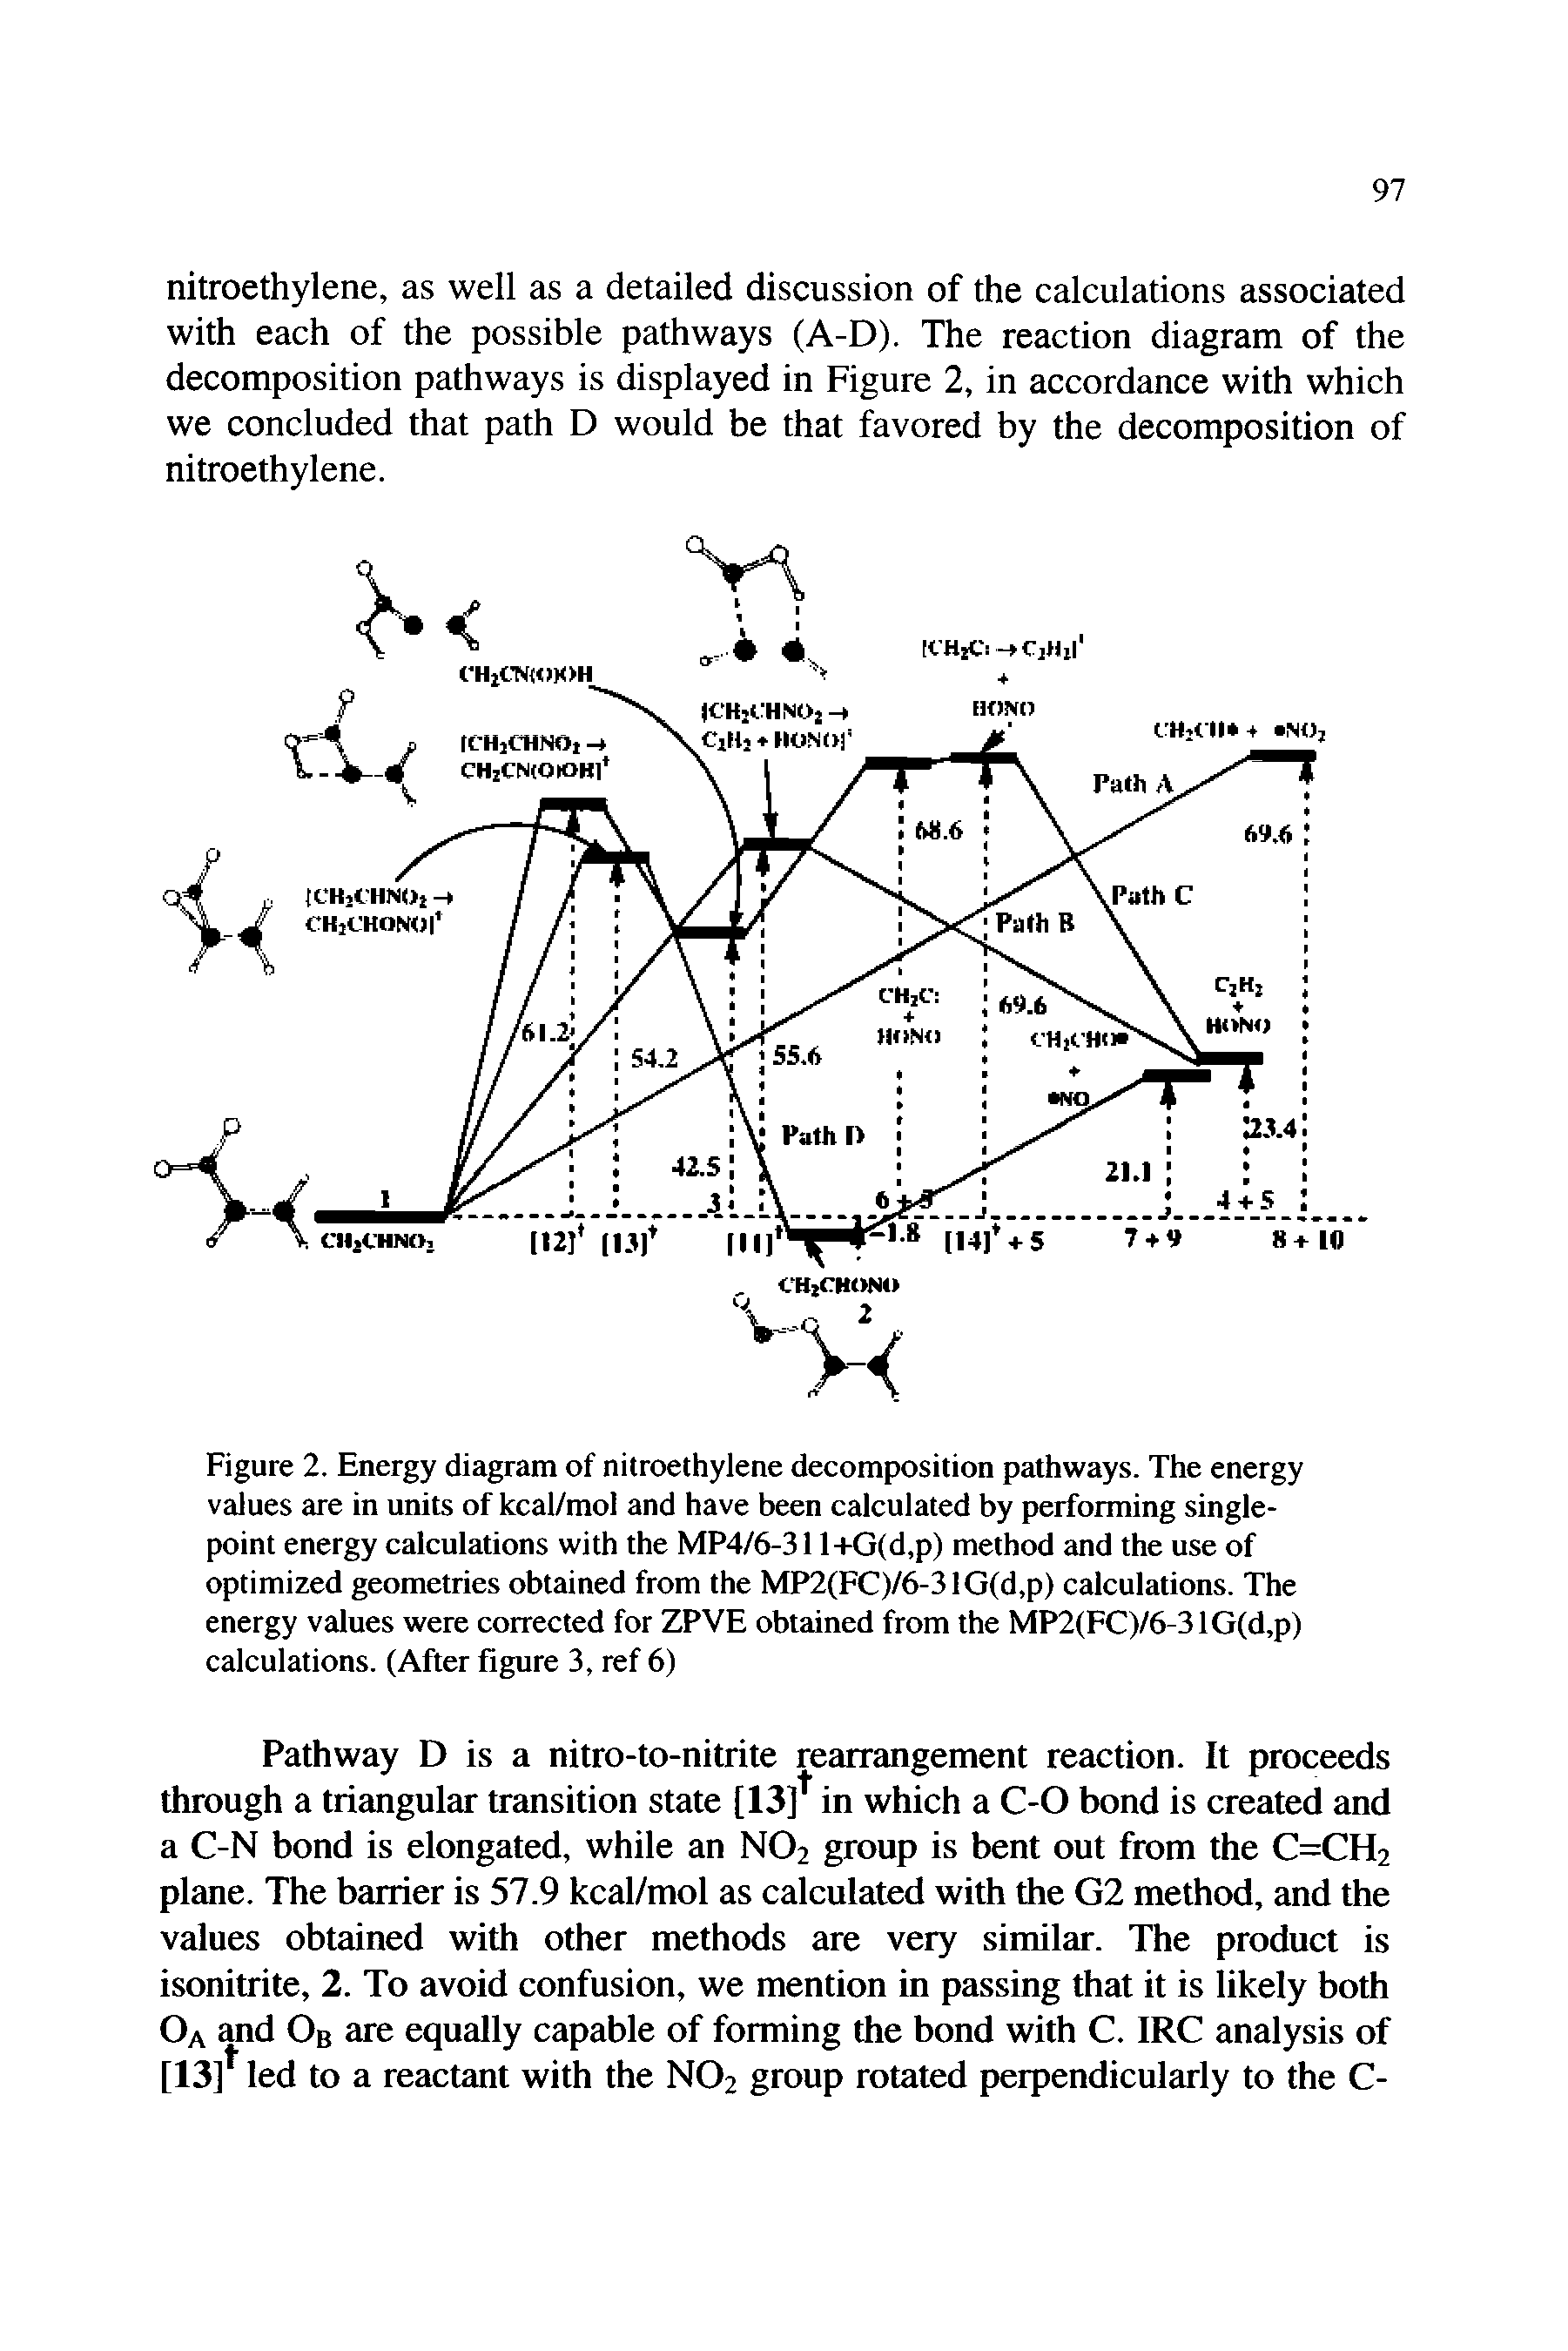 Figure 2. Energy diagram of nitroethylene decomposition pathways. The energy values are in units of kcal/mol and have been calculated by performing singlepoint energy calculations with the MP4/6-311+G(d,p) method and the use of optimized geometries obtained from the MP2(FC)/6-31G(d,p) calculations. The energy values were corrected for ZPVE obtained from the MP2(FC)/6-31G(d,p) calculations. (After figure 3, ref 6)...